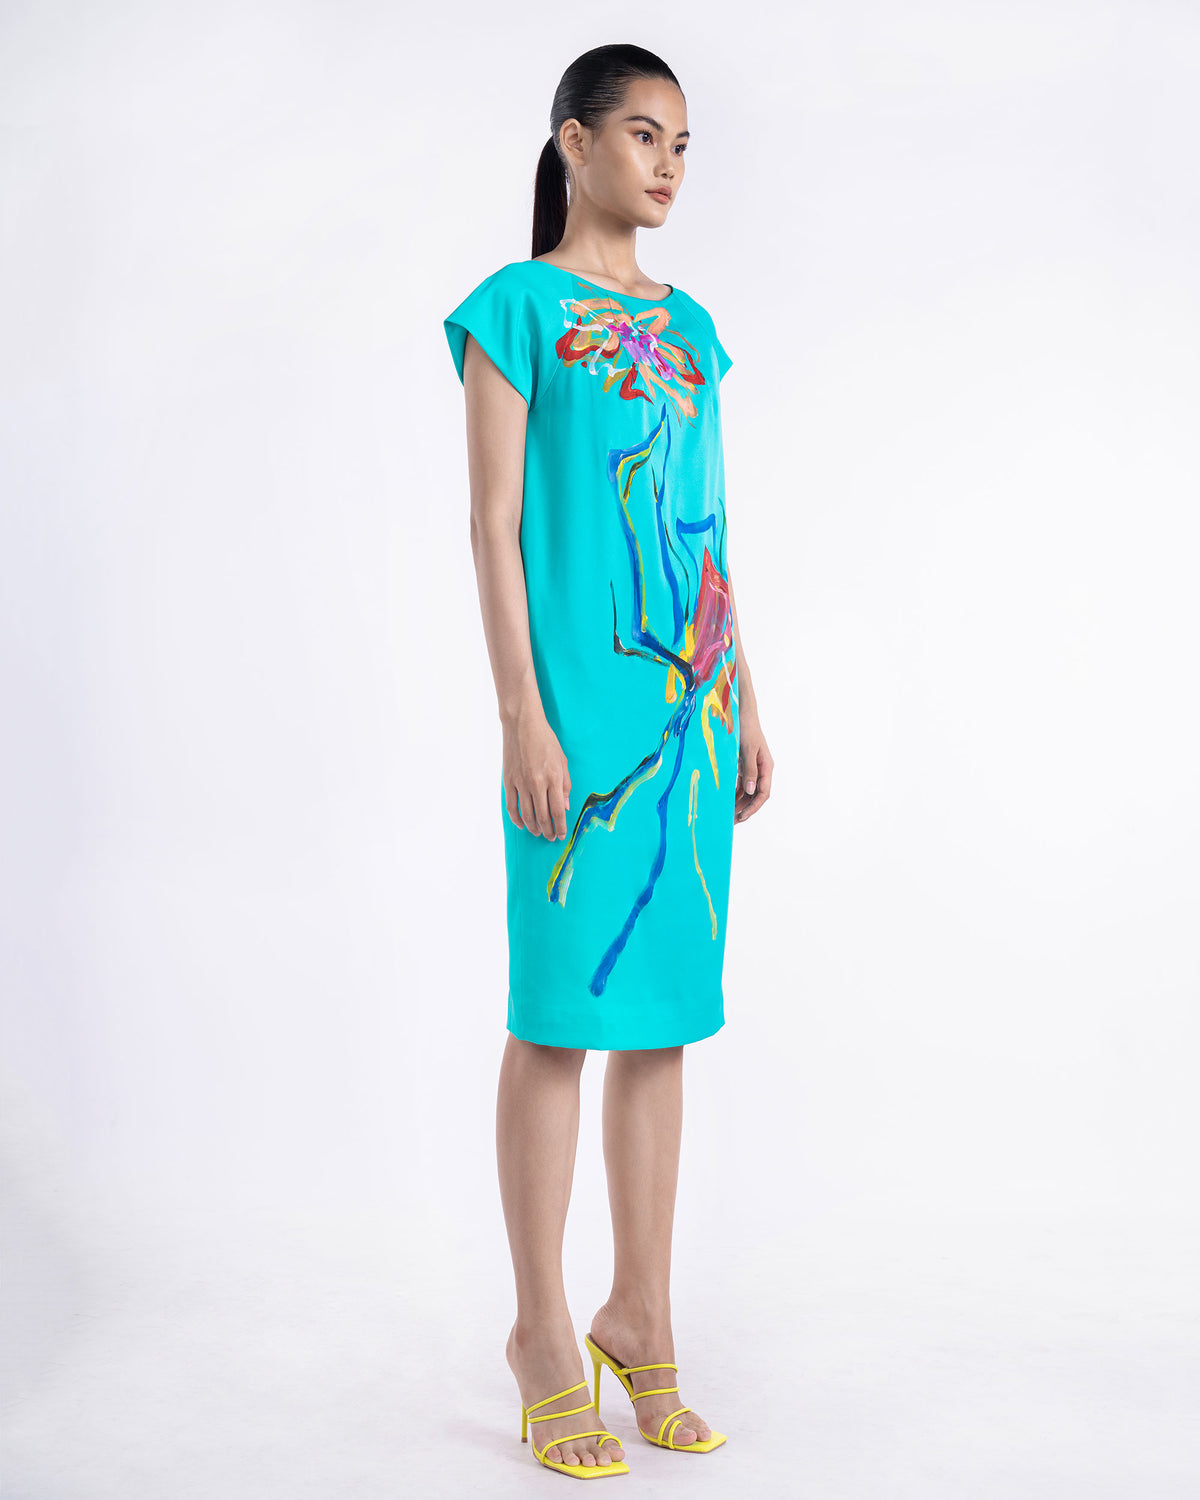 Spontaneous - Turquoise Cocoon Dress